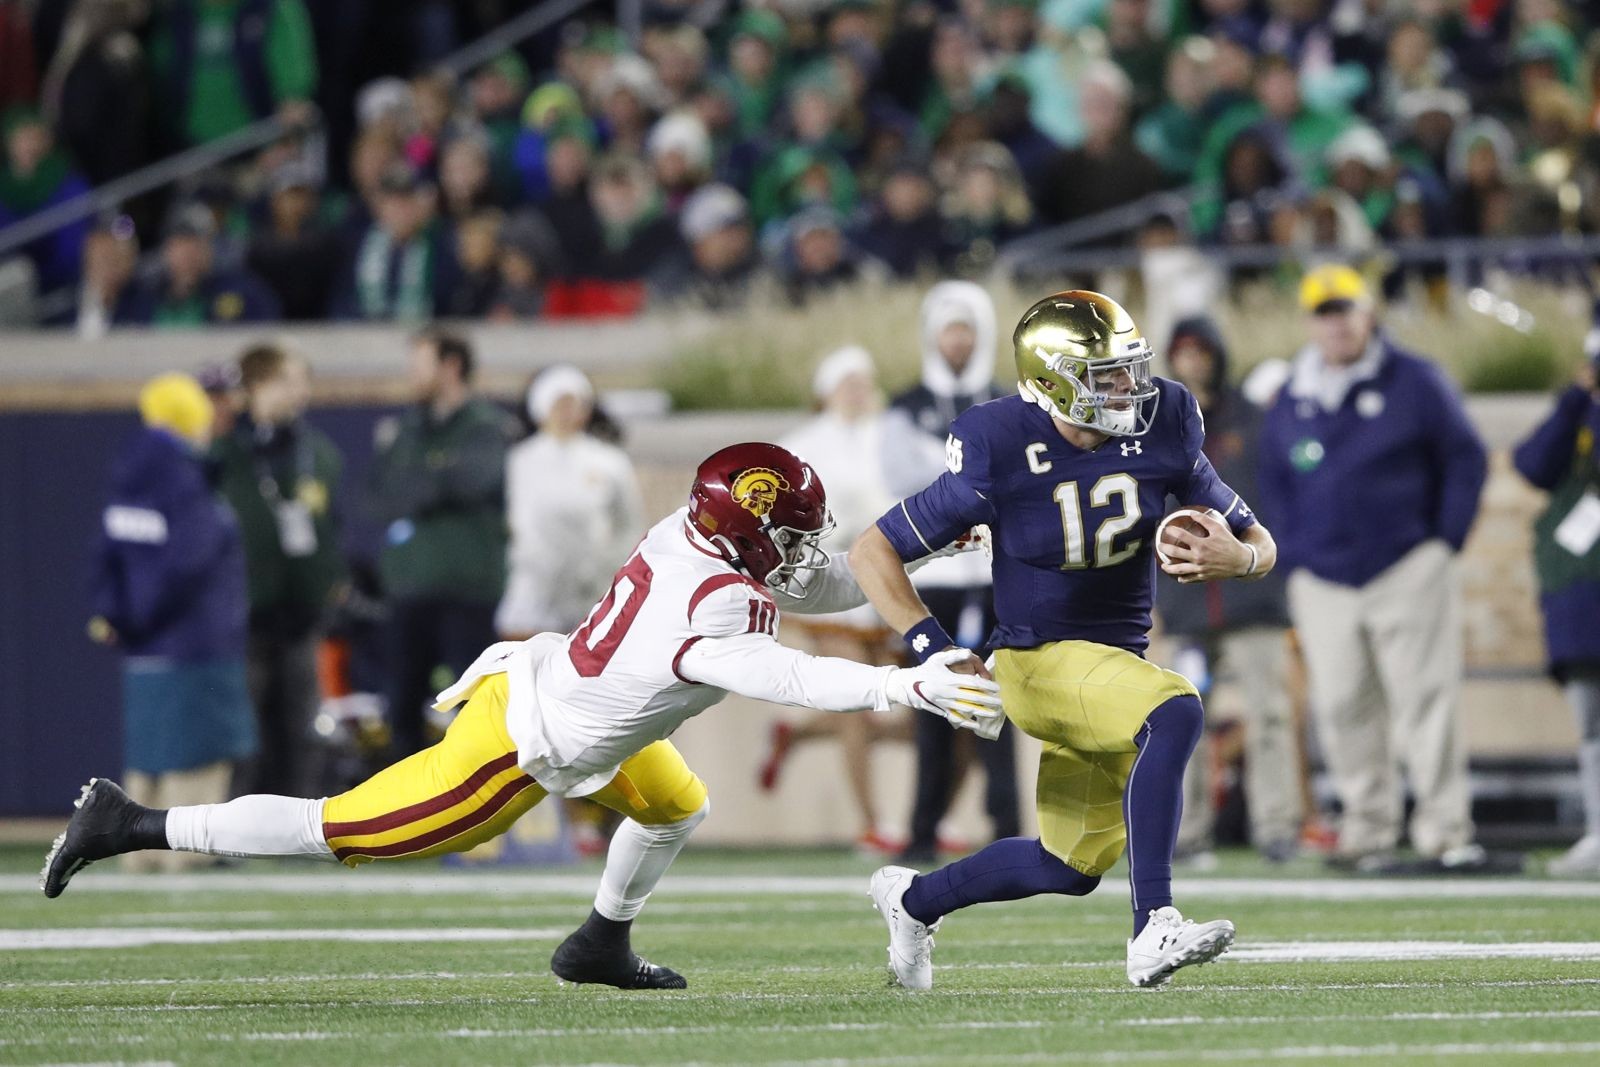 Notre Dame The play that changed everything vs. USC